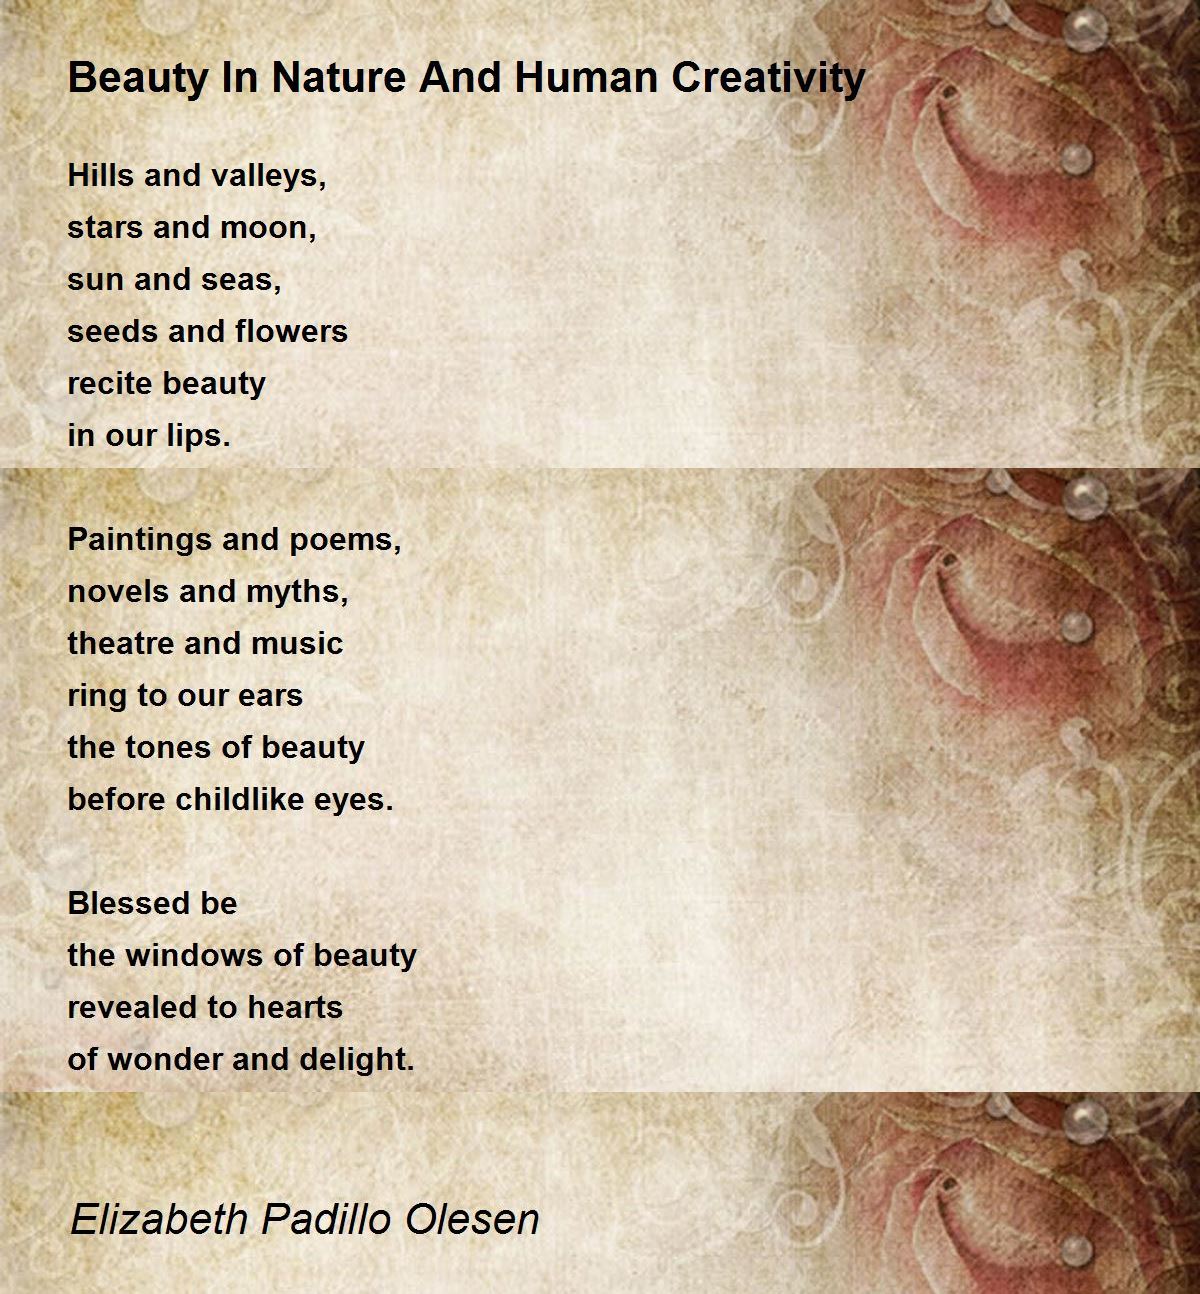 Beauty In Nature And Human Creativity by Elizabeth Olesen - Beauty In Nature And Human Creativity Poem